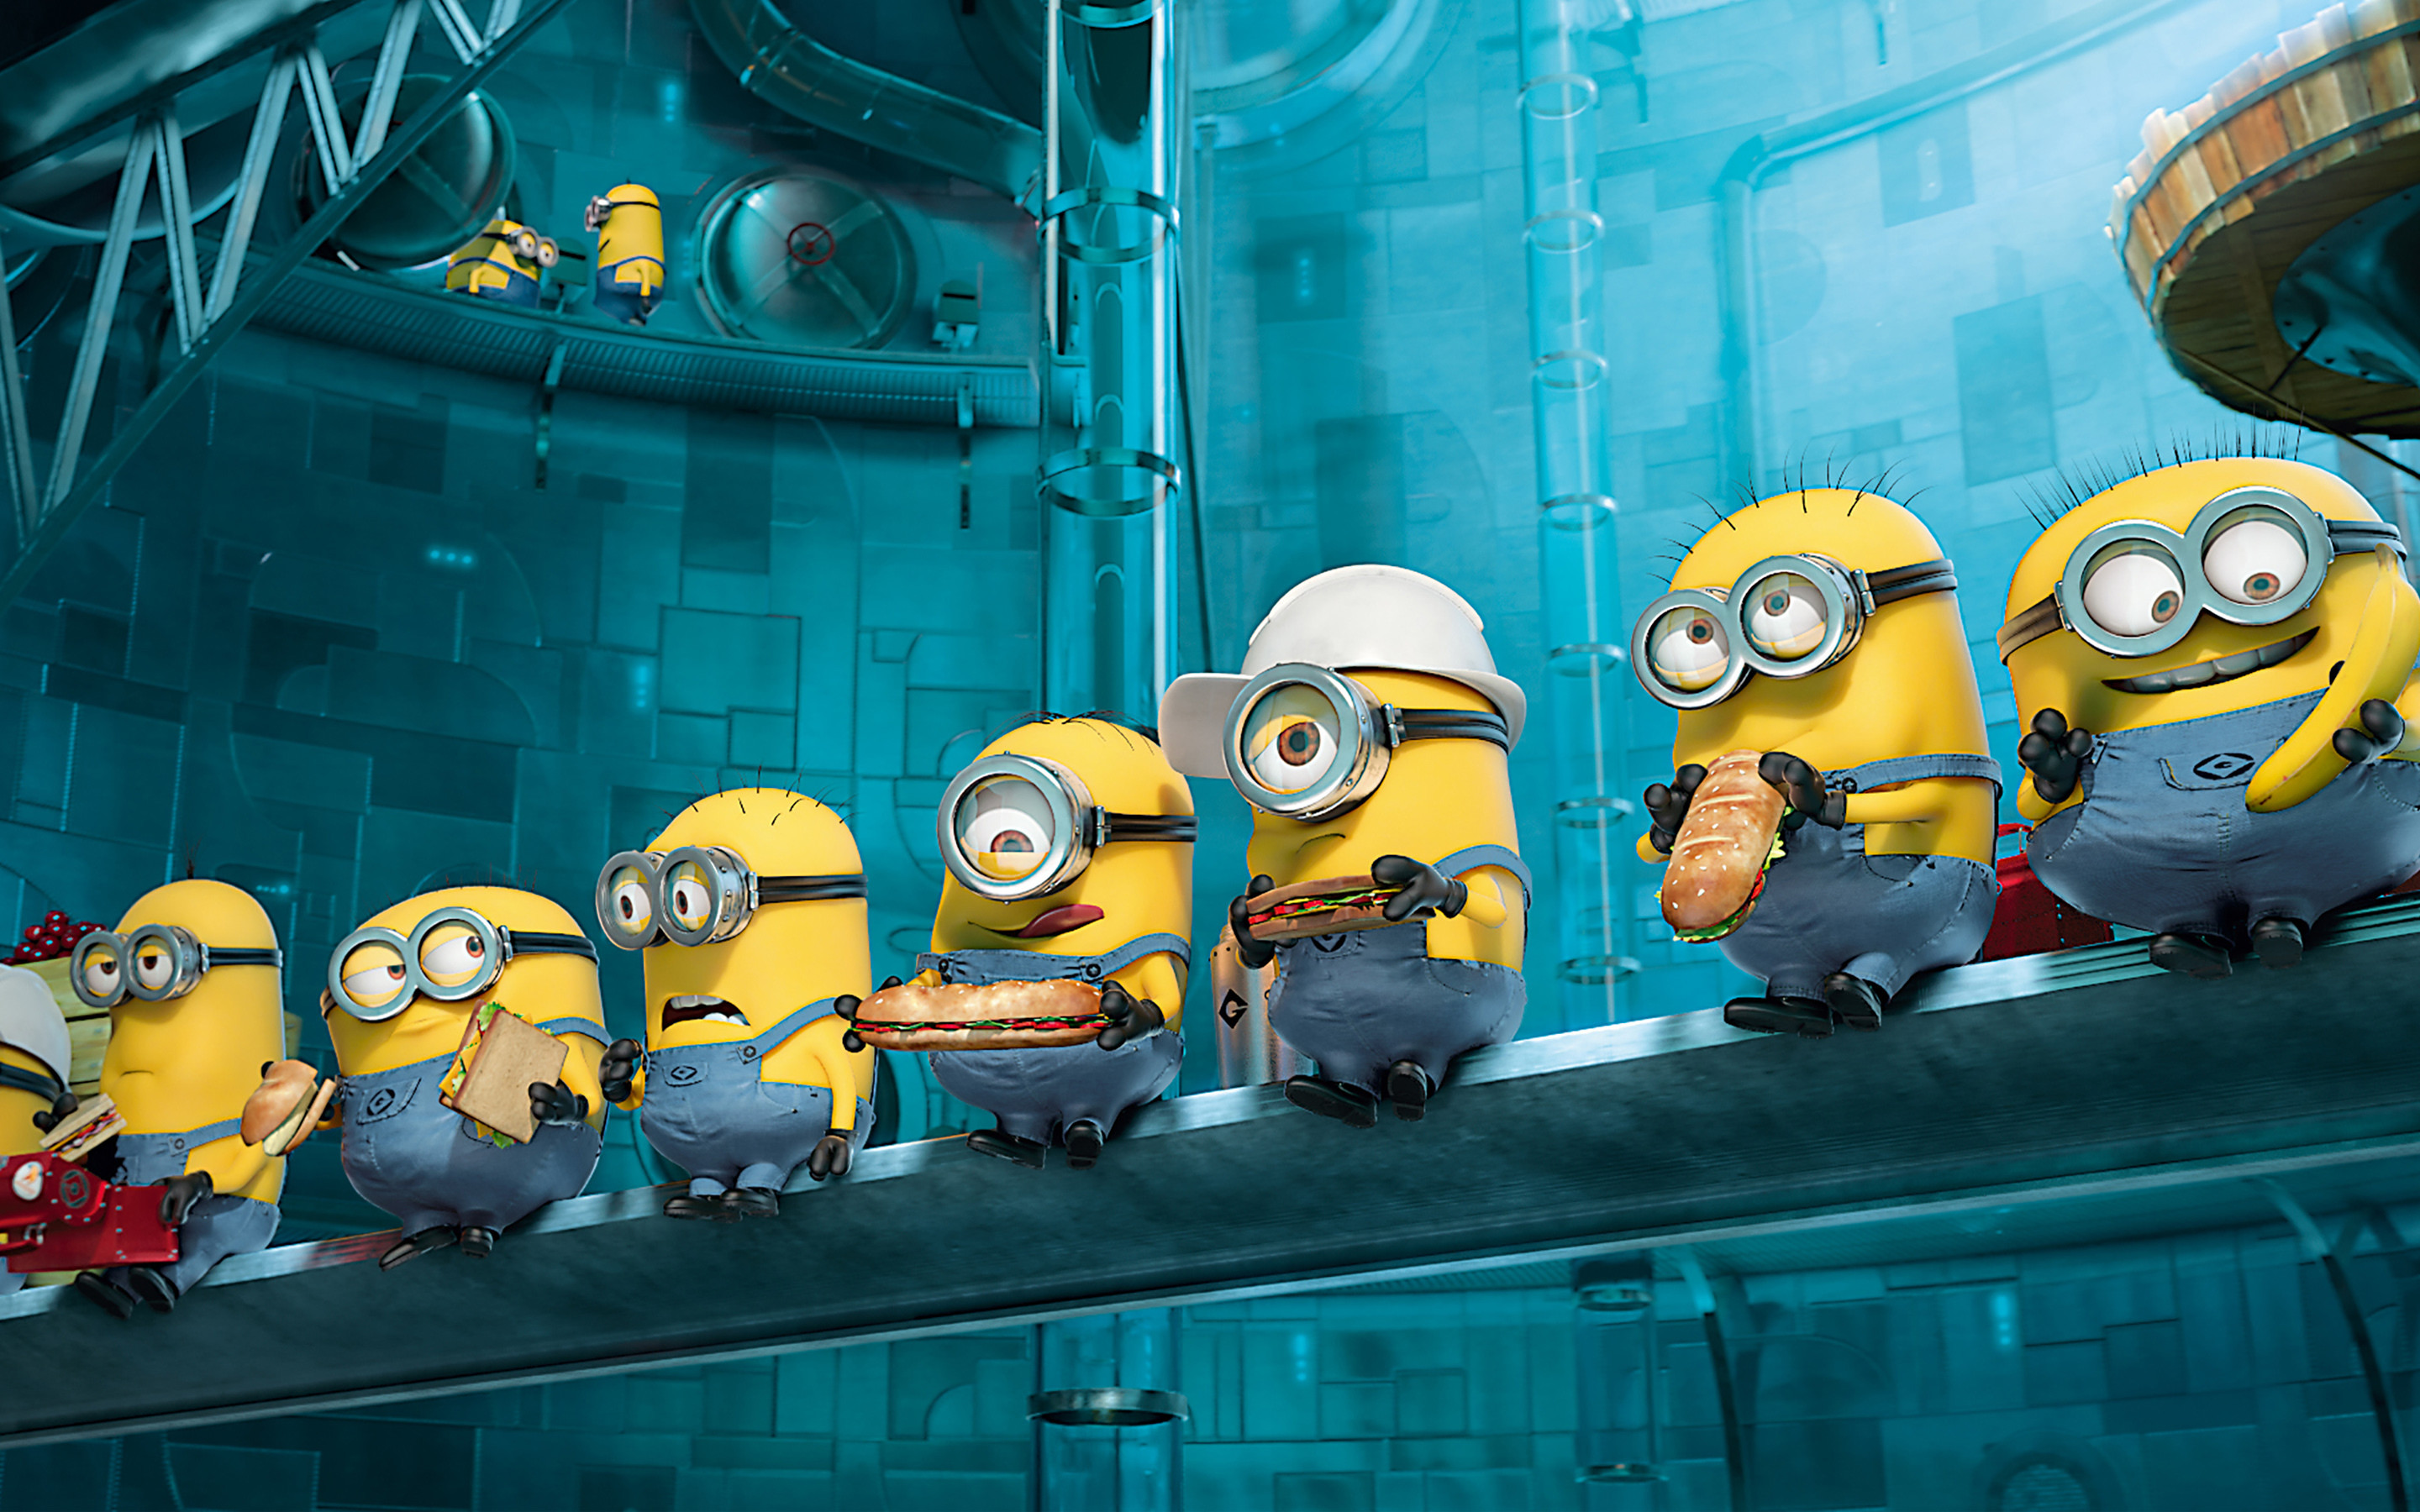 2880x1800 Minion Gadgets Wallpapers, Minion Backgrounds.  1.627 MB